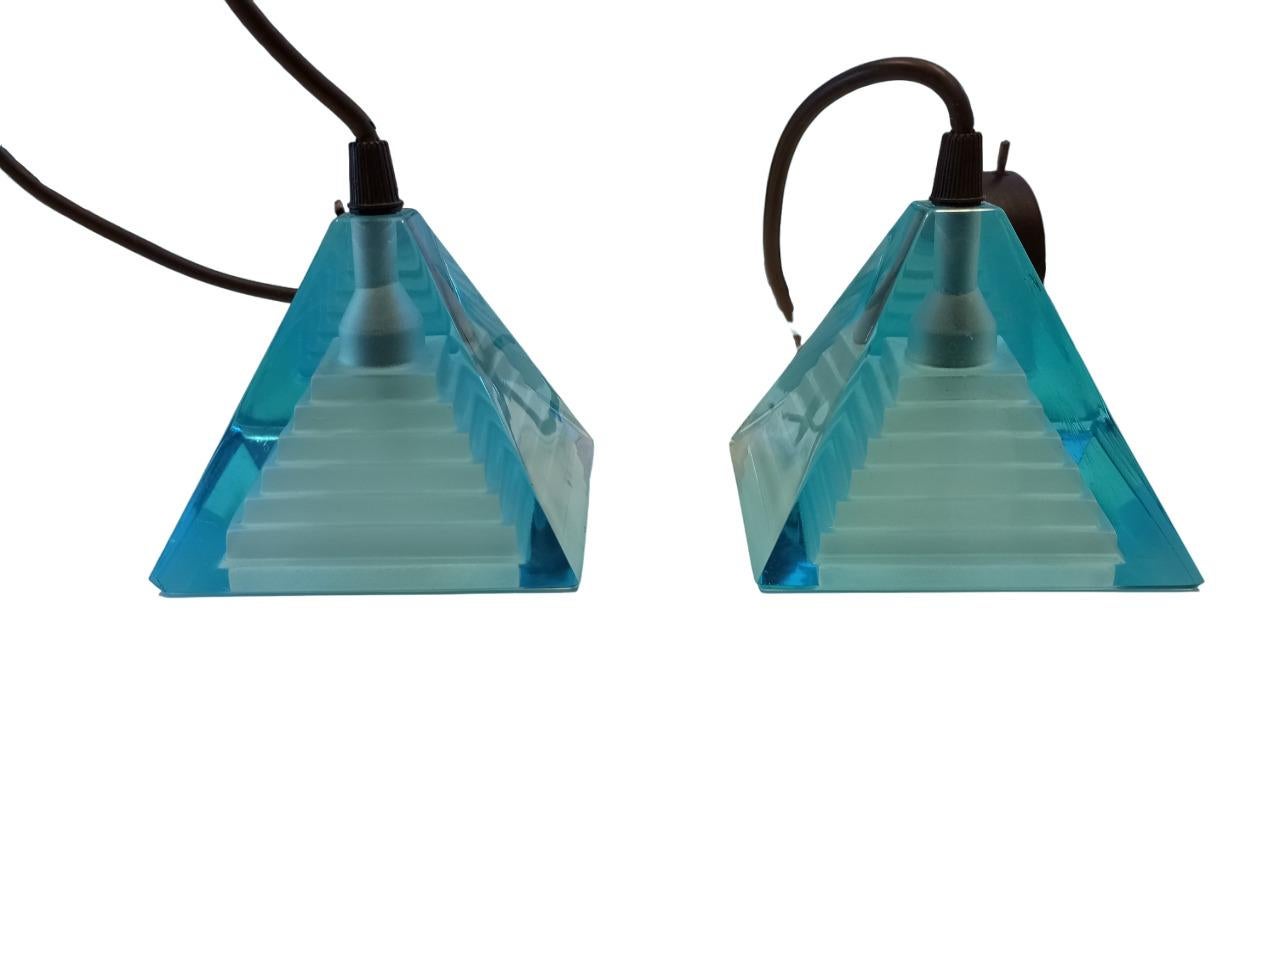 Pair of blue 'Pyramid' lamps designed by Paolo Piva for Mazzega  Murano glass  For Sale 5